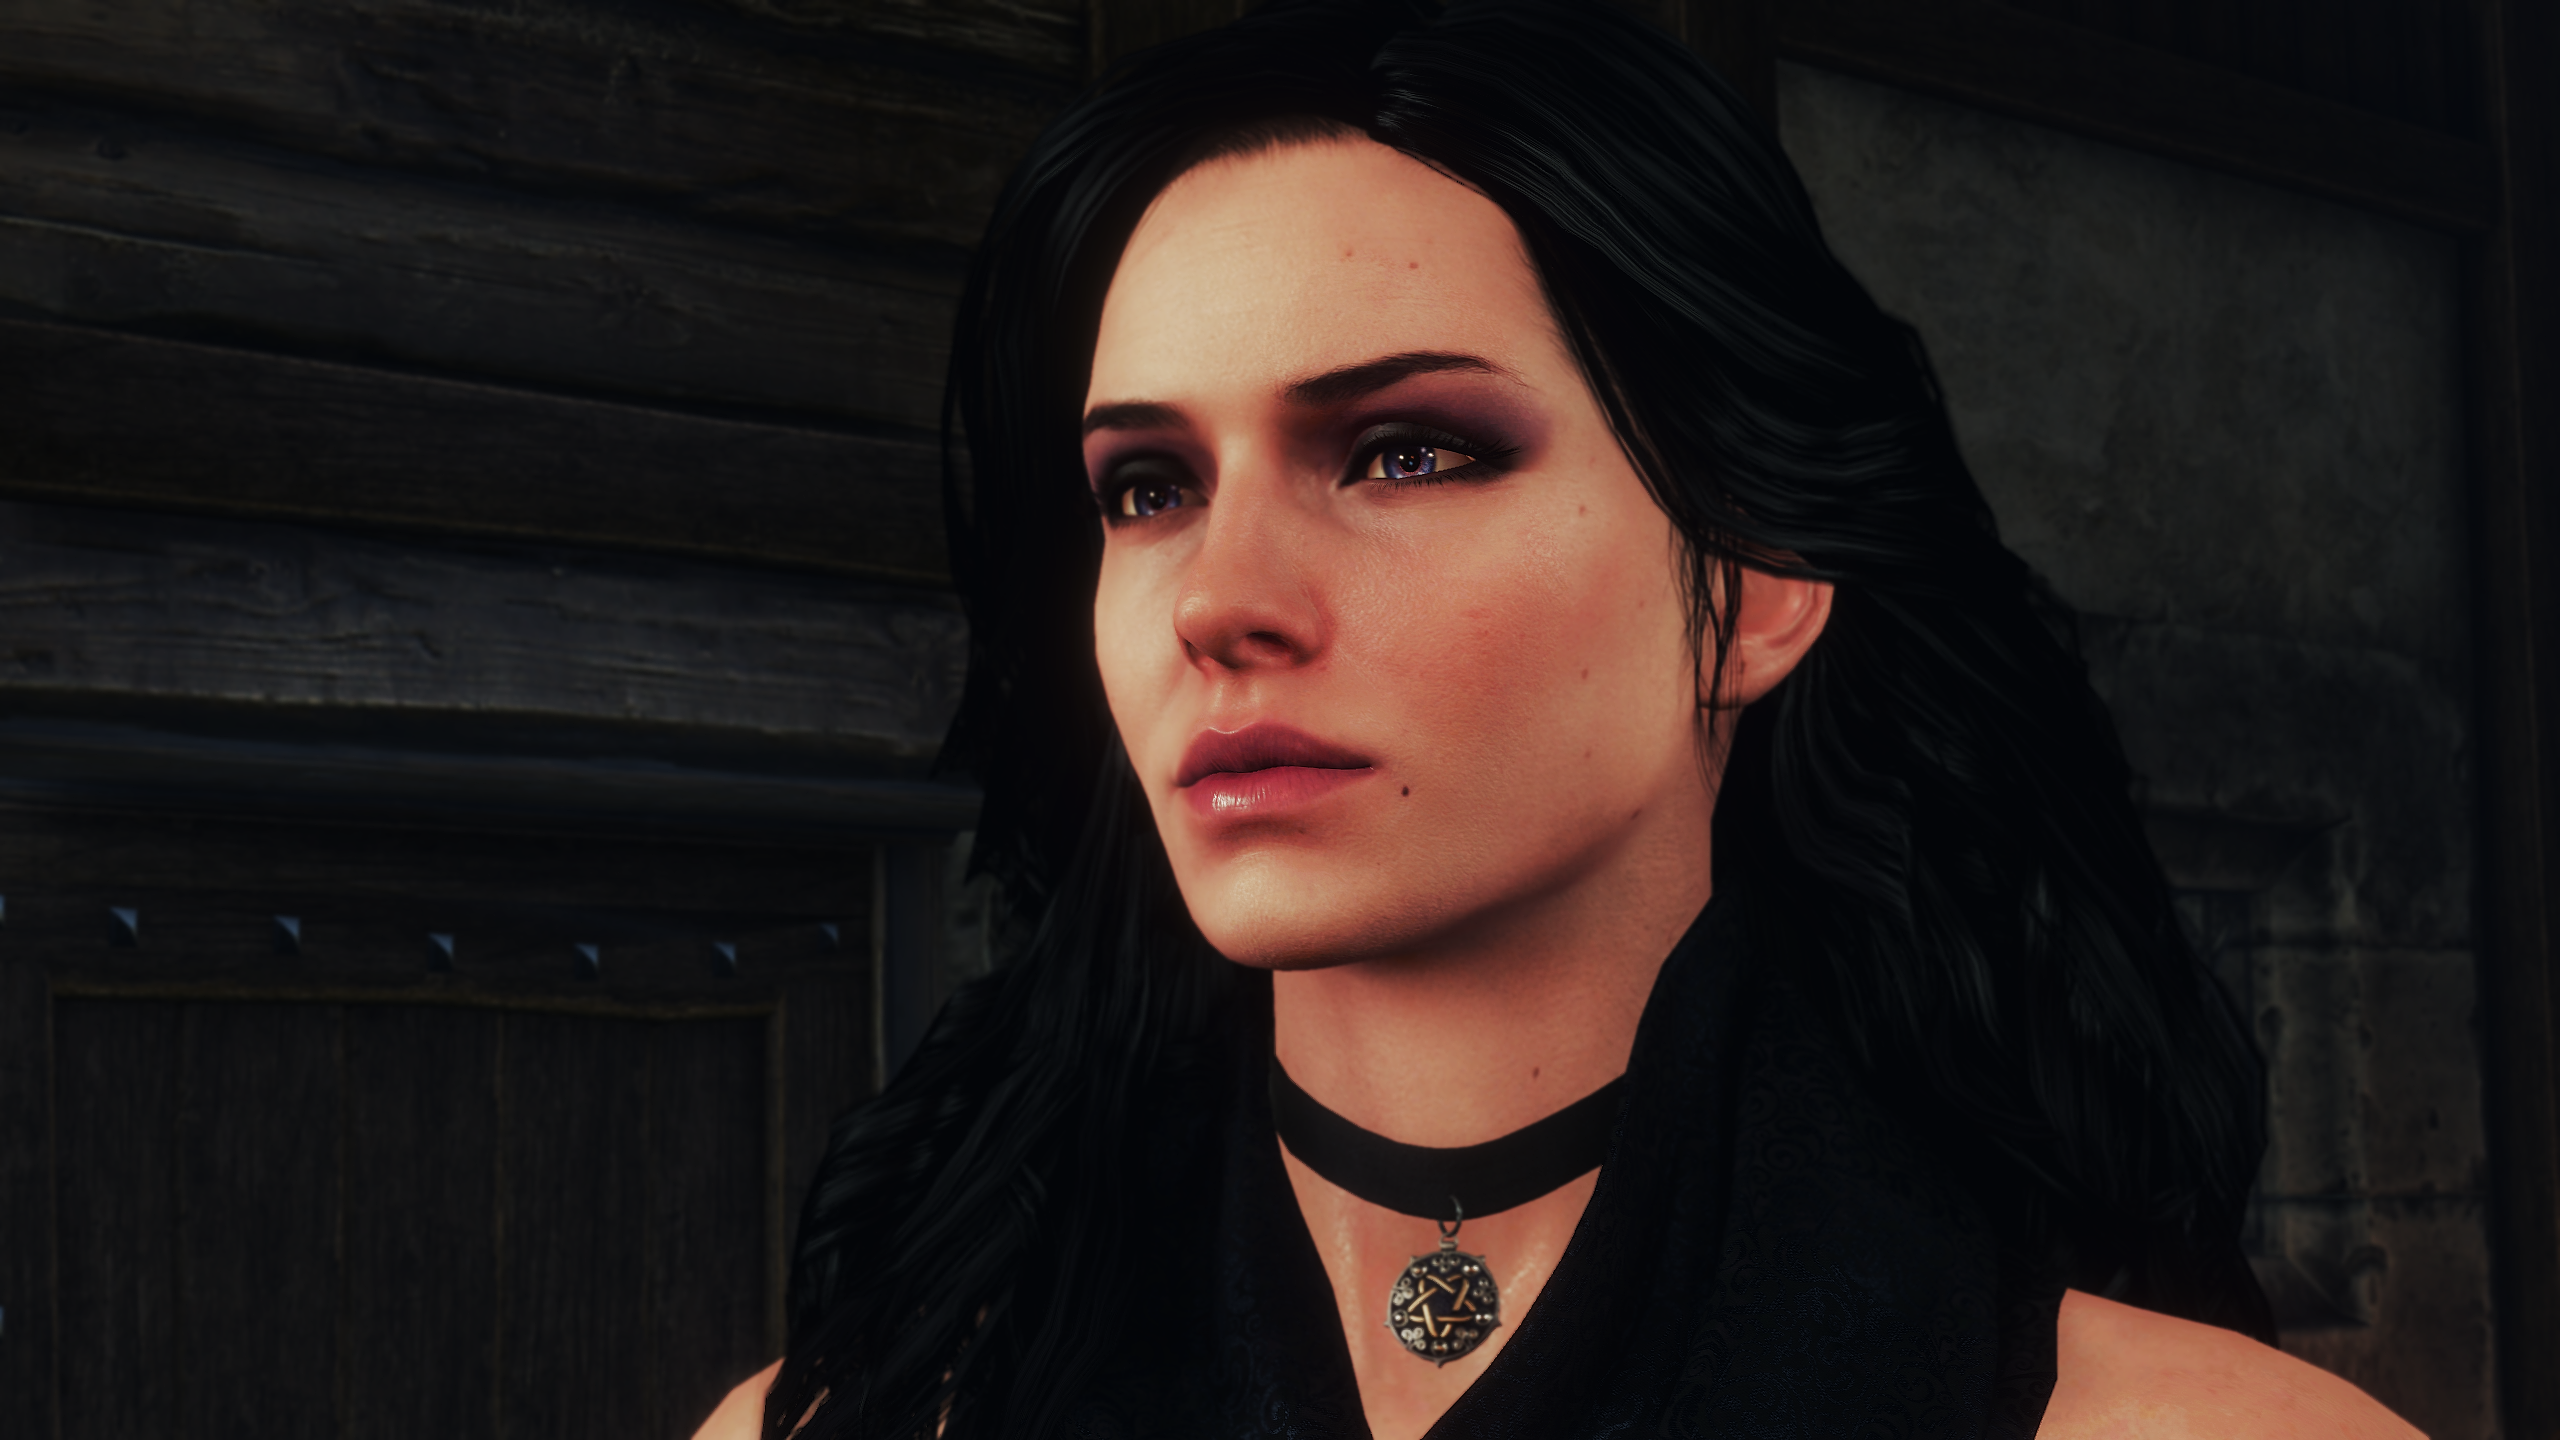 Yennefer of vengerberg the witcher 3 voiced standalone follower фото 64